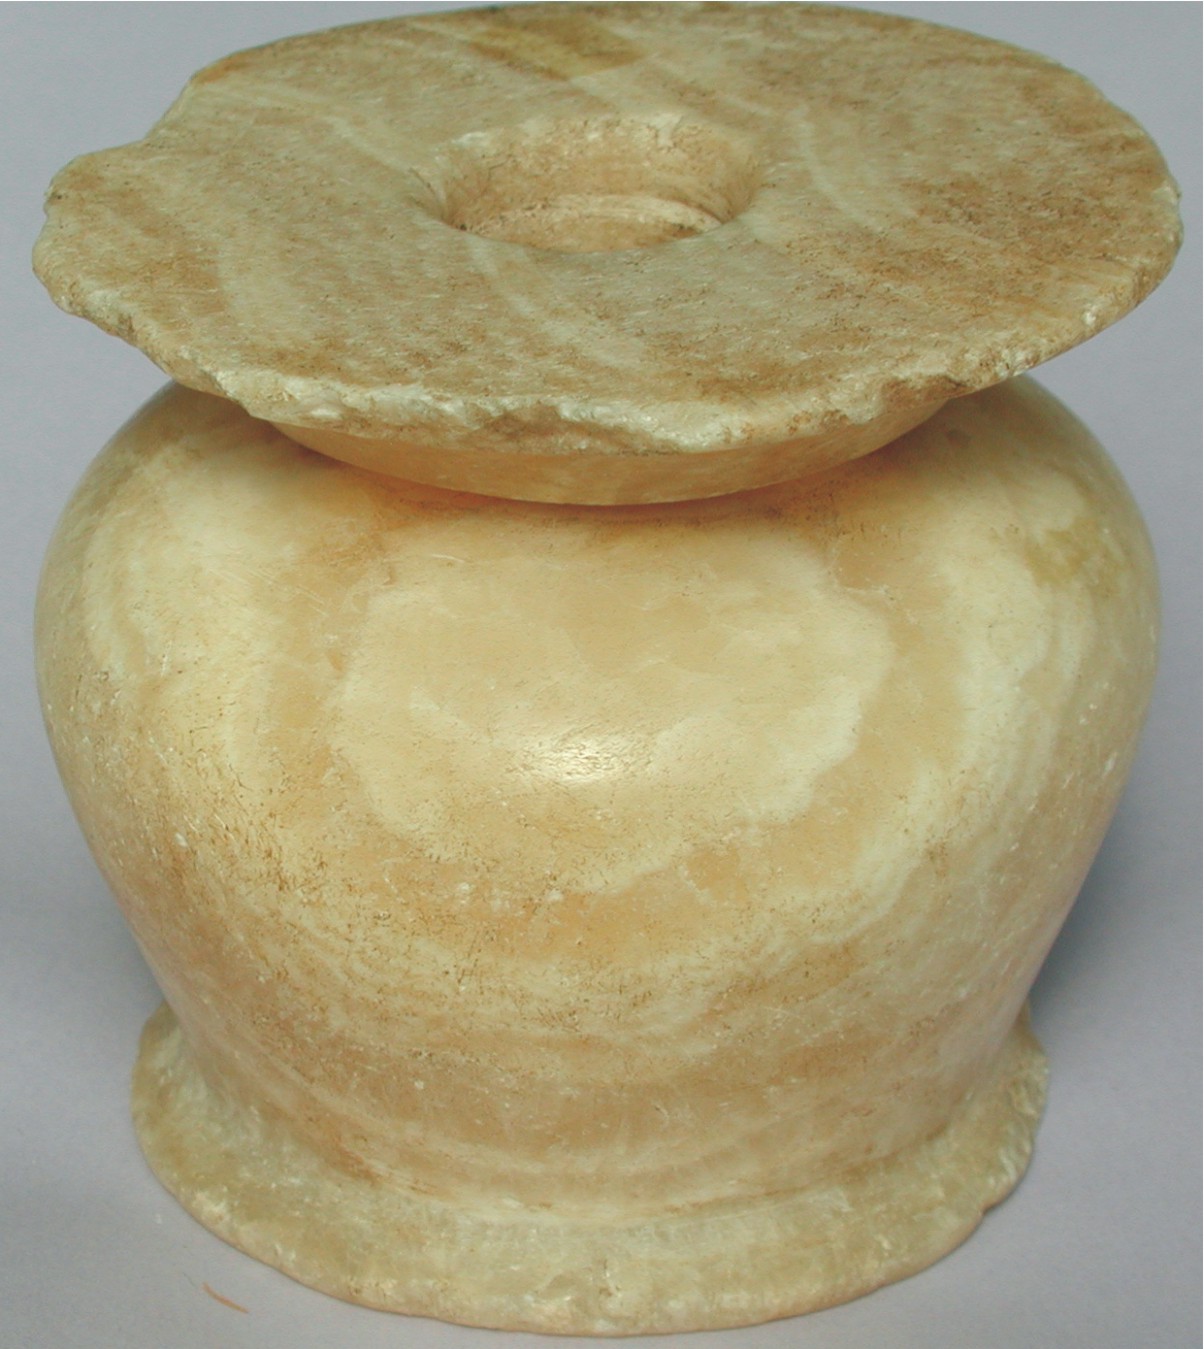 Image for: Travertine vessel with lid